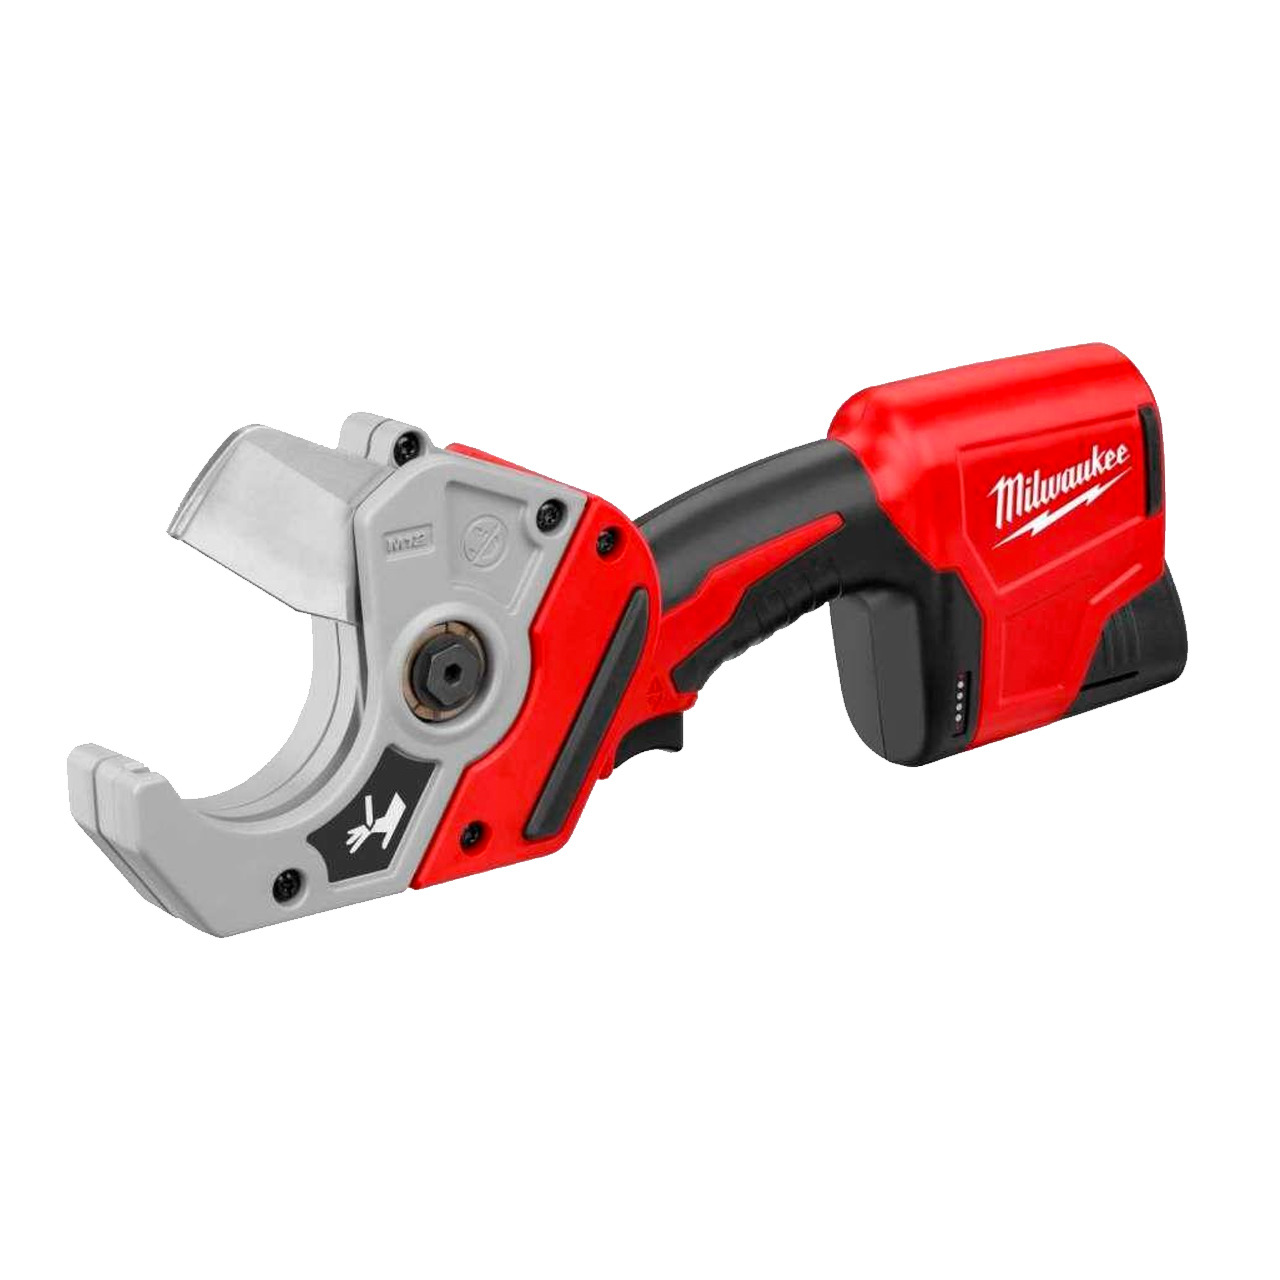 KS TOOLS 150.1505 Exhaust chain pipe cutter for stainless steel pipes, ø  19-83mm